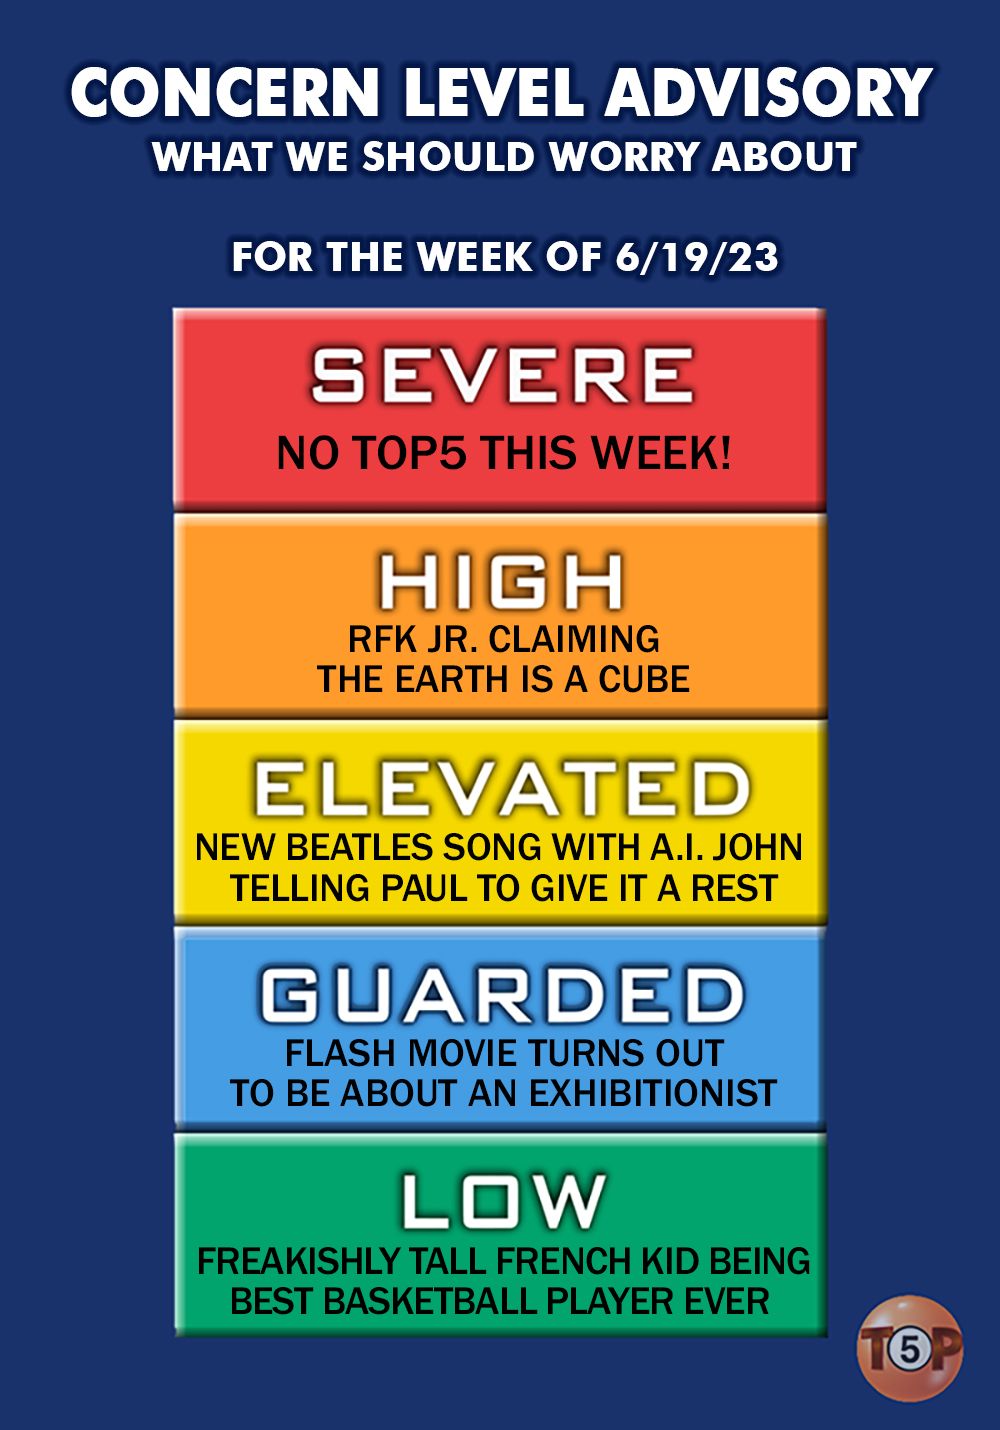 CONCERN LEVEL ADVISORY (What we should worry about for the week of 6/19/23)  |  SEVERE: No Top5 this week! HIGH: RFK JR. claiming the Earth is a cube MEDIUM: "New" Beatles song with A.I. John telling Paul to give it a rest GUARDED: Flash movie turns out to be about an exhibitionist LOW: Freakishly tall French kid being best basketball player ever 